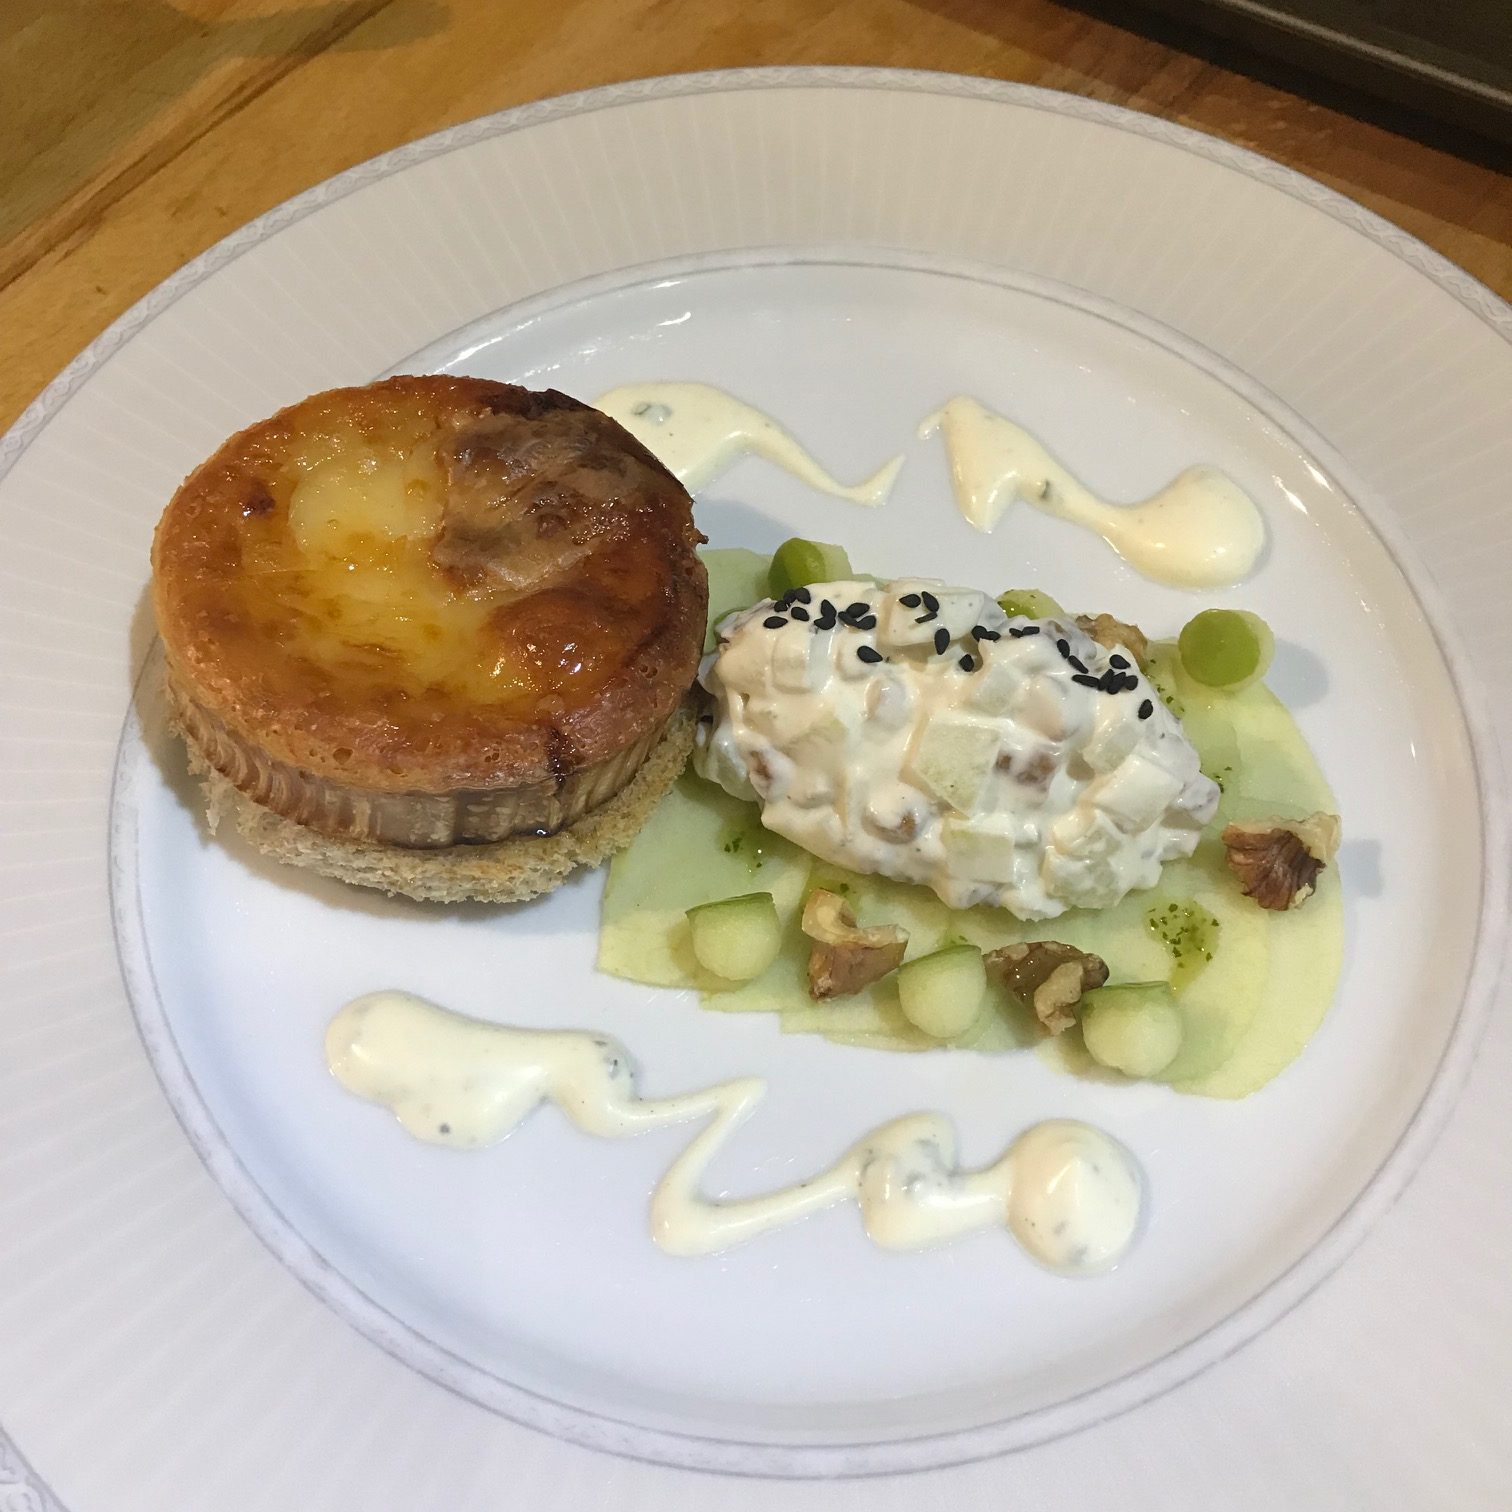 20190919 - Goat's Cheese with Apples, Walnuts & Celery